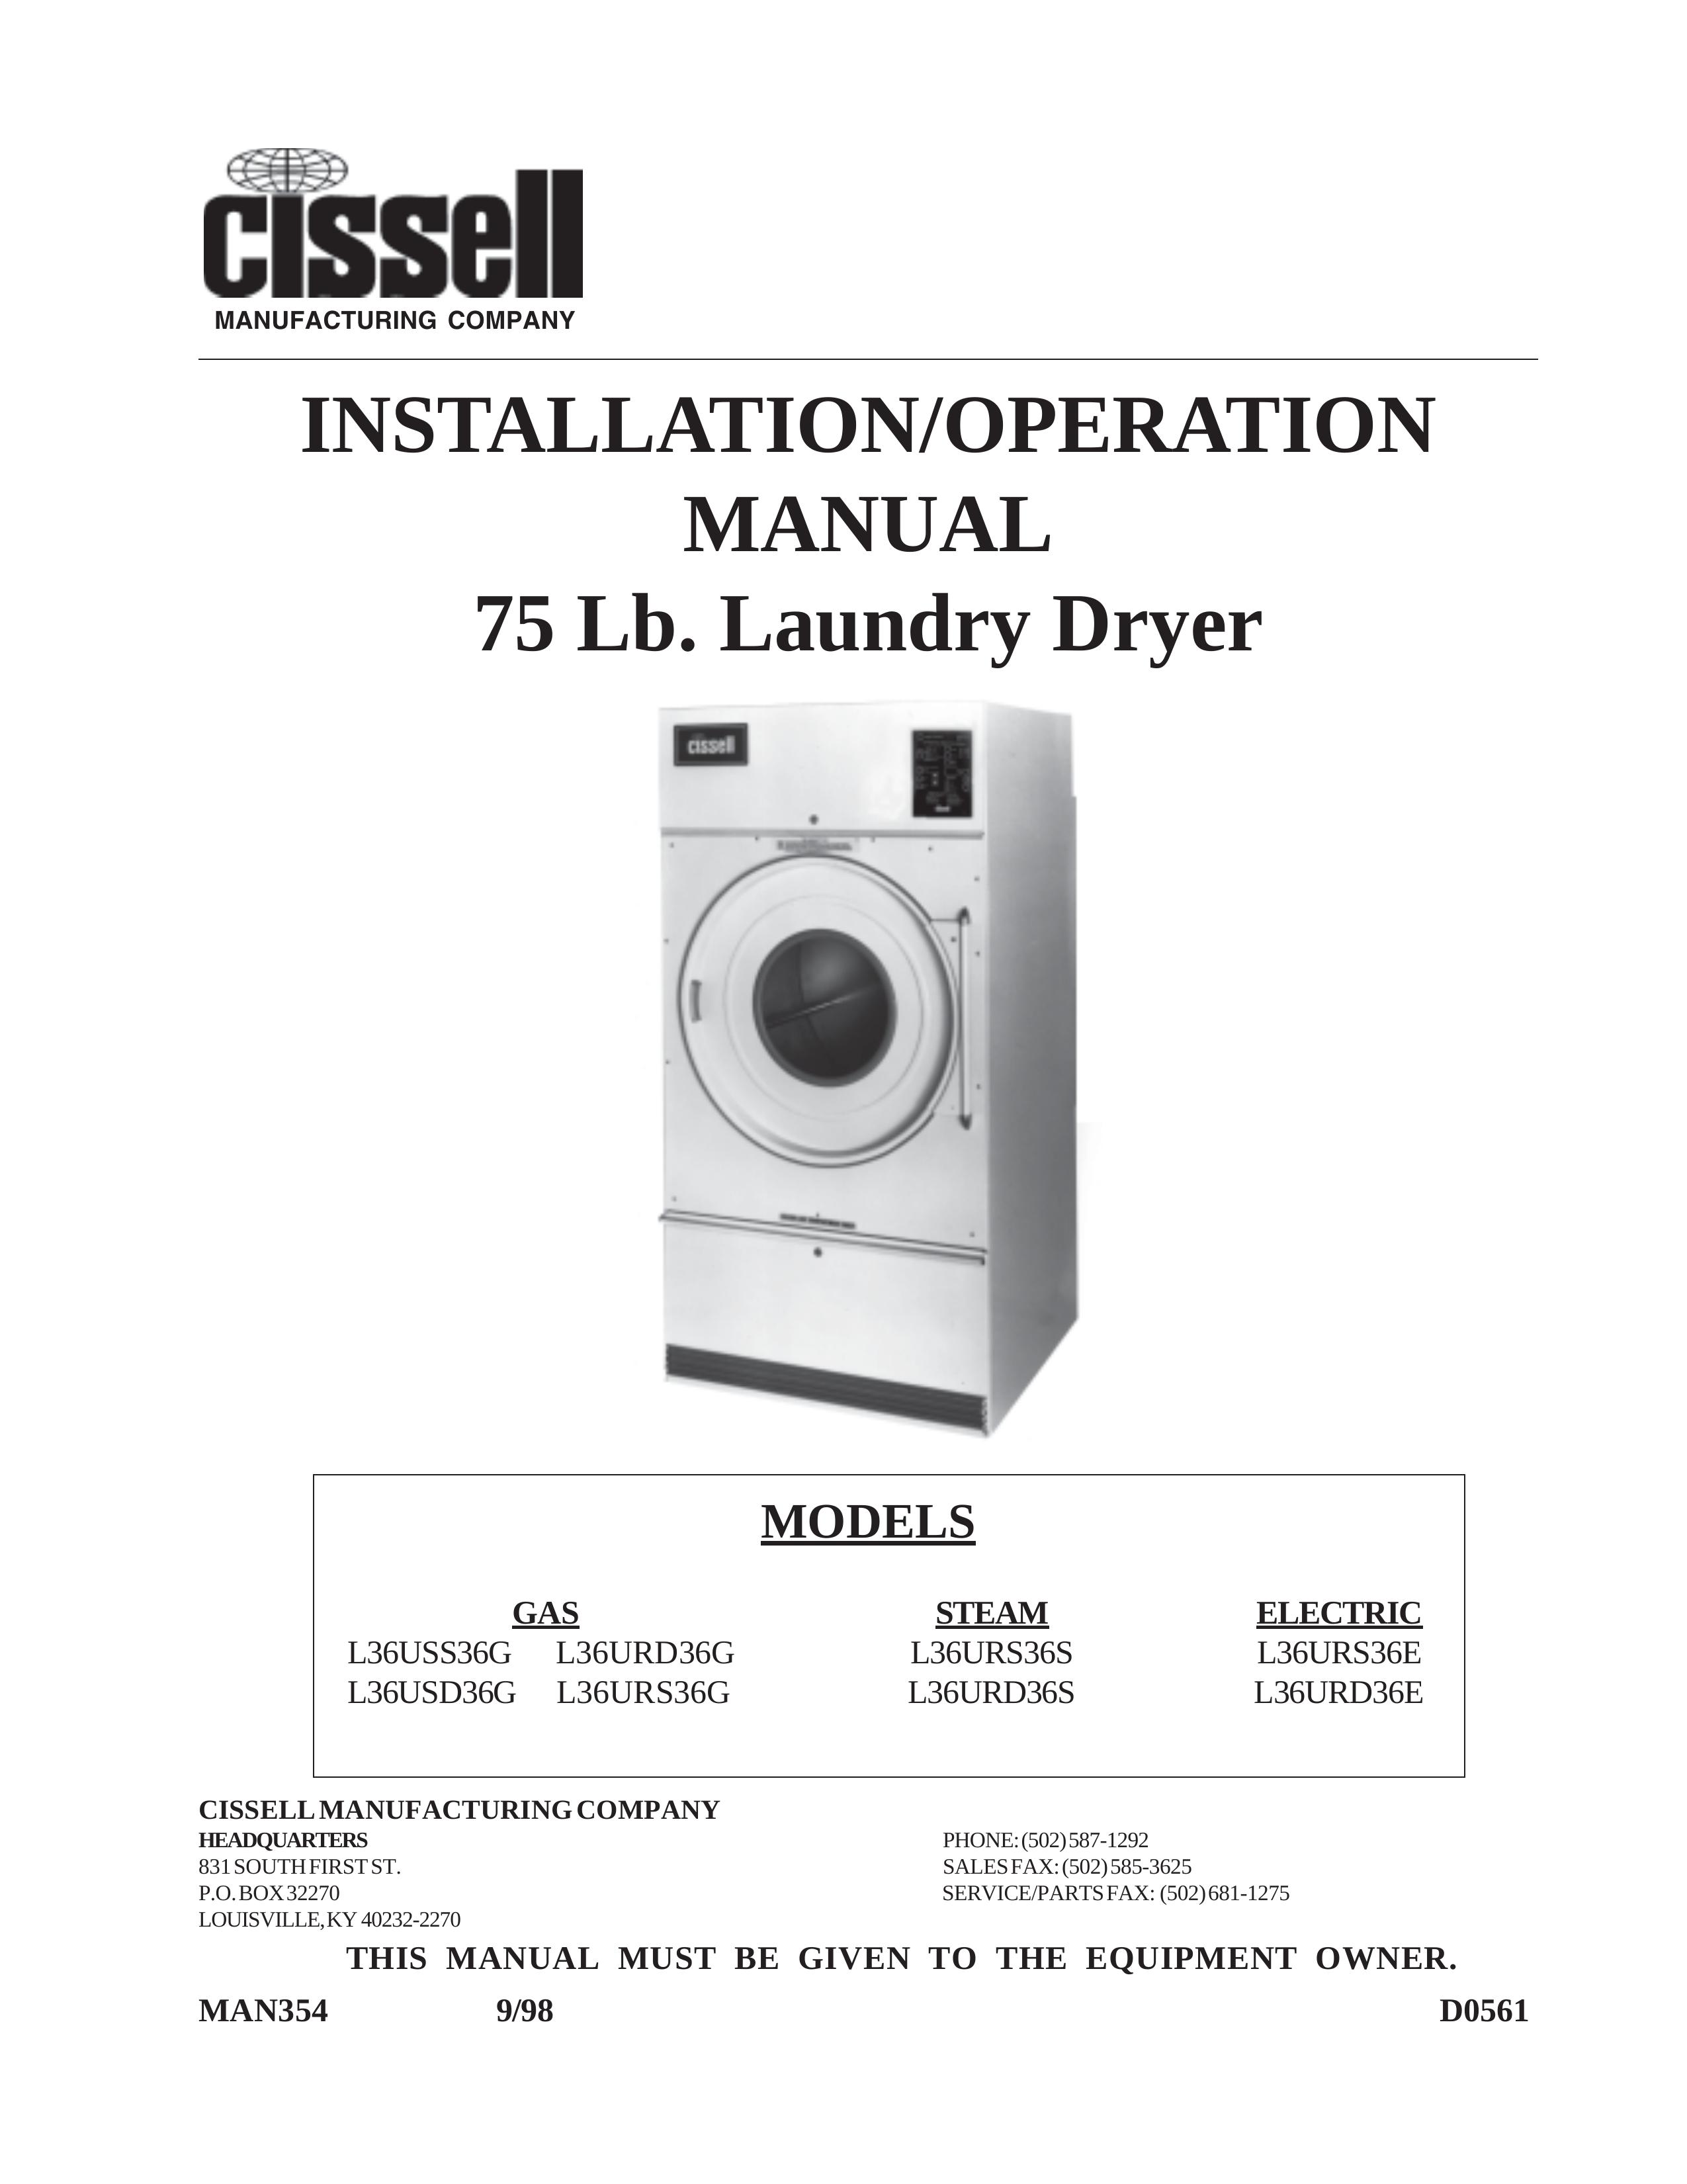 Cissell L36USD36G Clothes Dryer User Manual